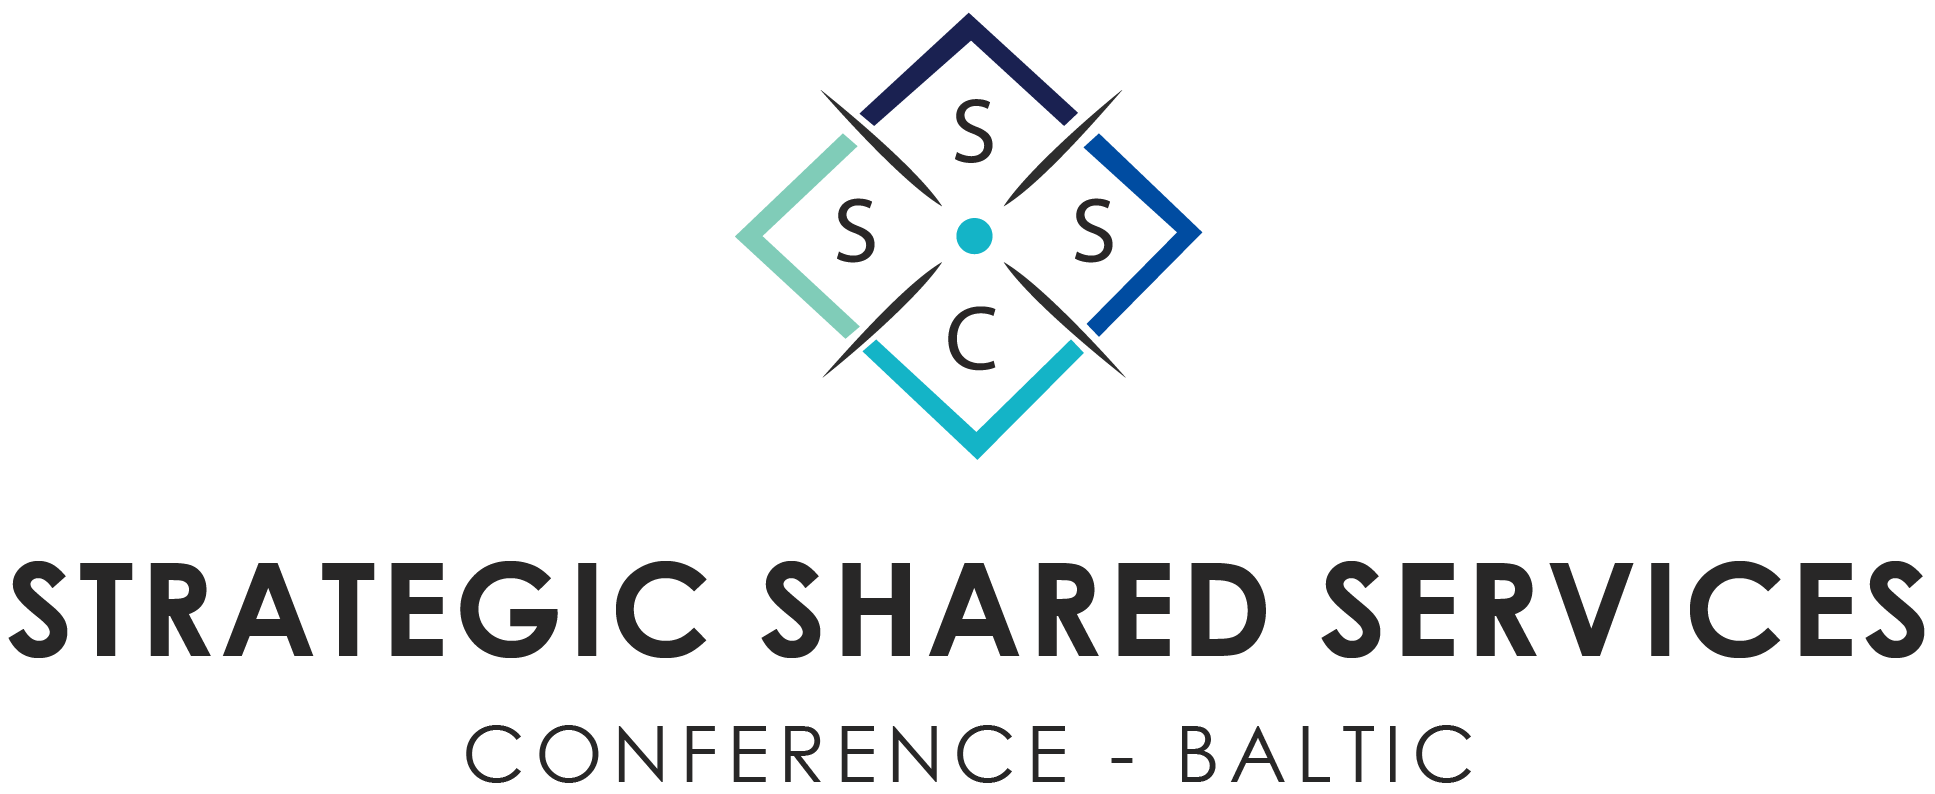 Following on the success of the inaugural edition in Vilnius in October 2016, Connect Minds bring the Baltic Strategic SSC Conference back to the Lithuanian capital for an even more targeted and value-packed event dedicated to shared service centers professionals in the region.
Taking place on 17-18 October 2017, the conference promises to bring the movers and shakers of the industry together in a very informal yet informative environment encouraging questions, exchange and learning!

What is new?
- Value-packed 2-day program only as an answer to your business needs
- 1 ½ day of conference sessions including close to 50% of practical case-studies
- Double stream (HR & Governance / Process Optimization & Technology) to optimize learning opportunities
- 2 optional workshops to deepen your knowledge and technical skills
- More networking for improved interaction 
